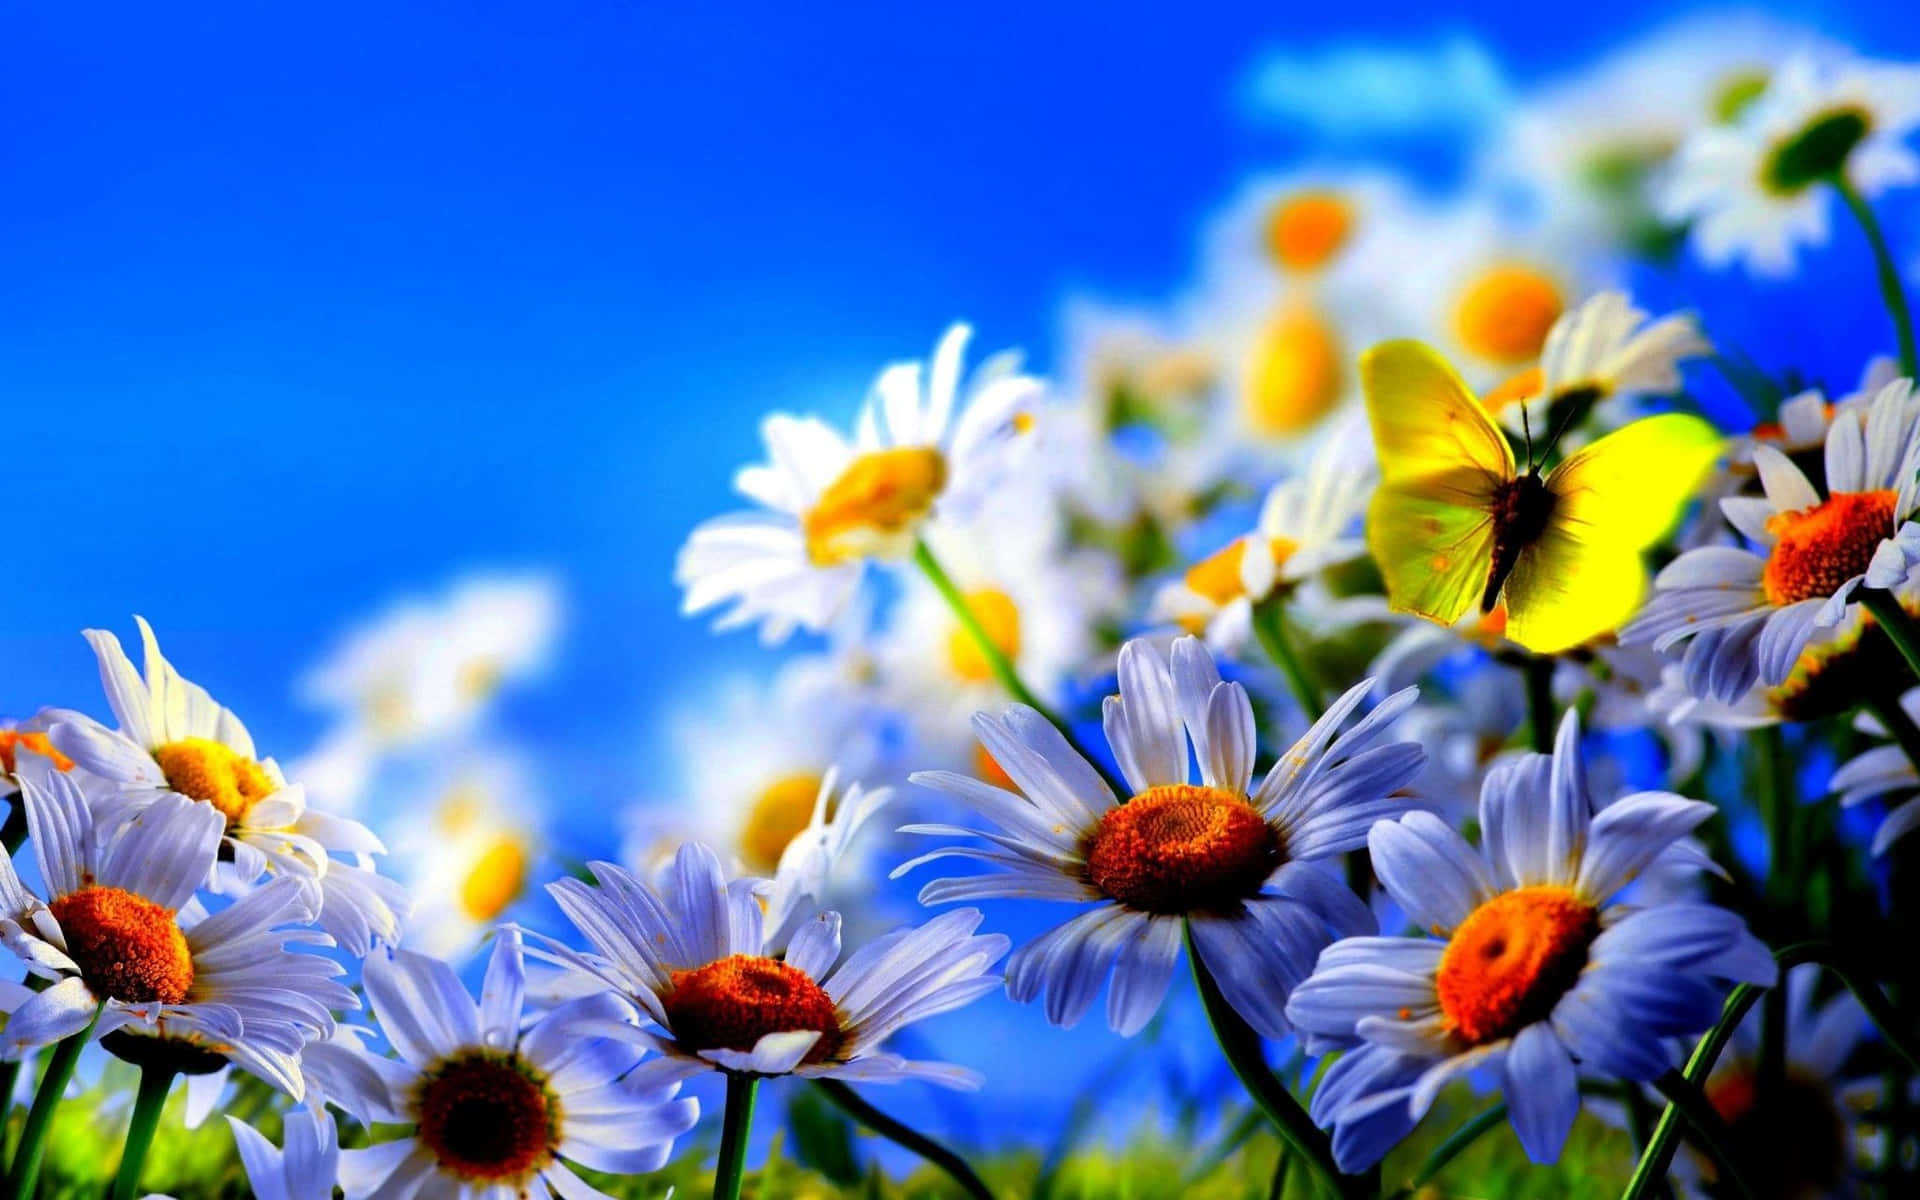 A Field Of Daisies With A Butterfly In The Background